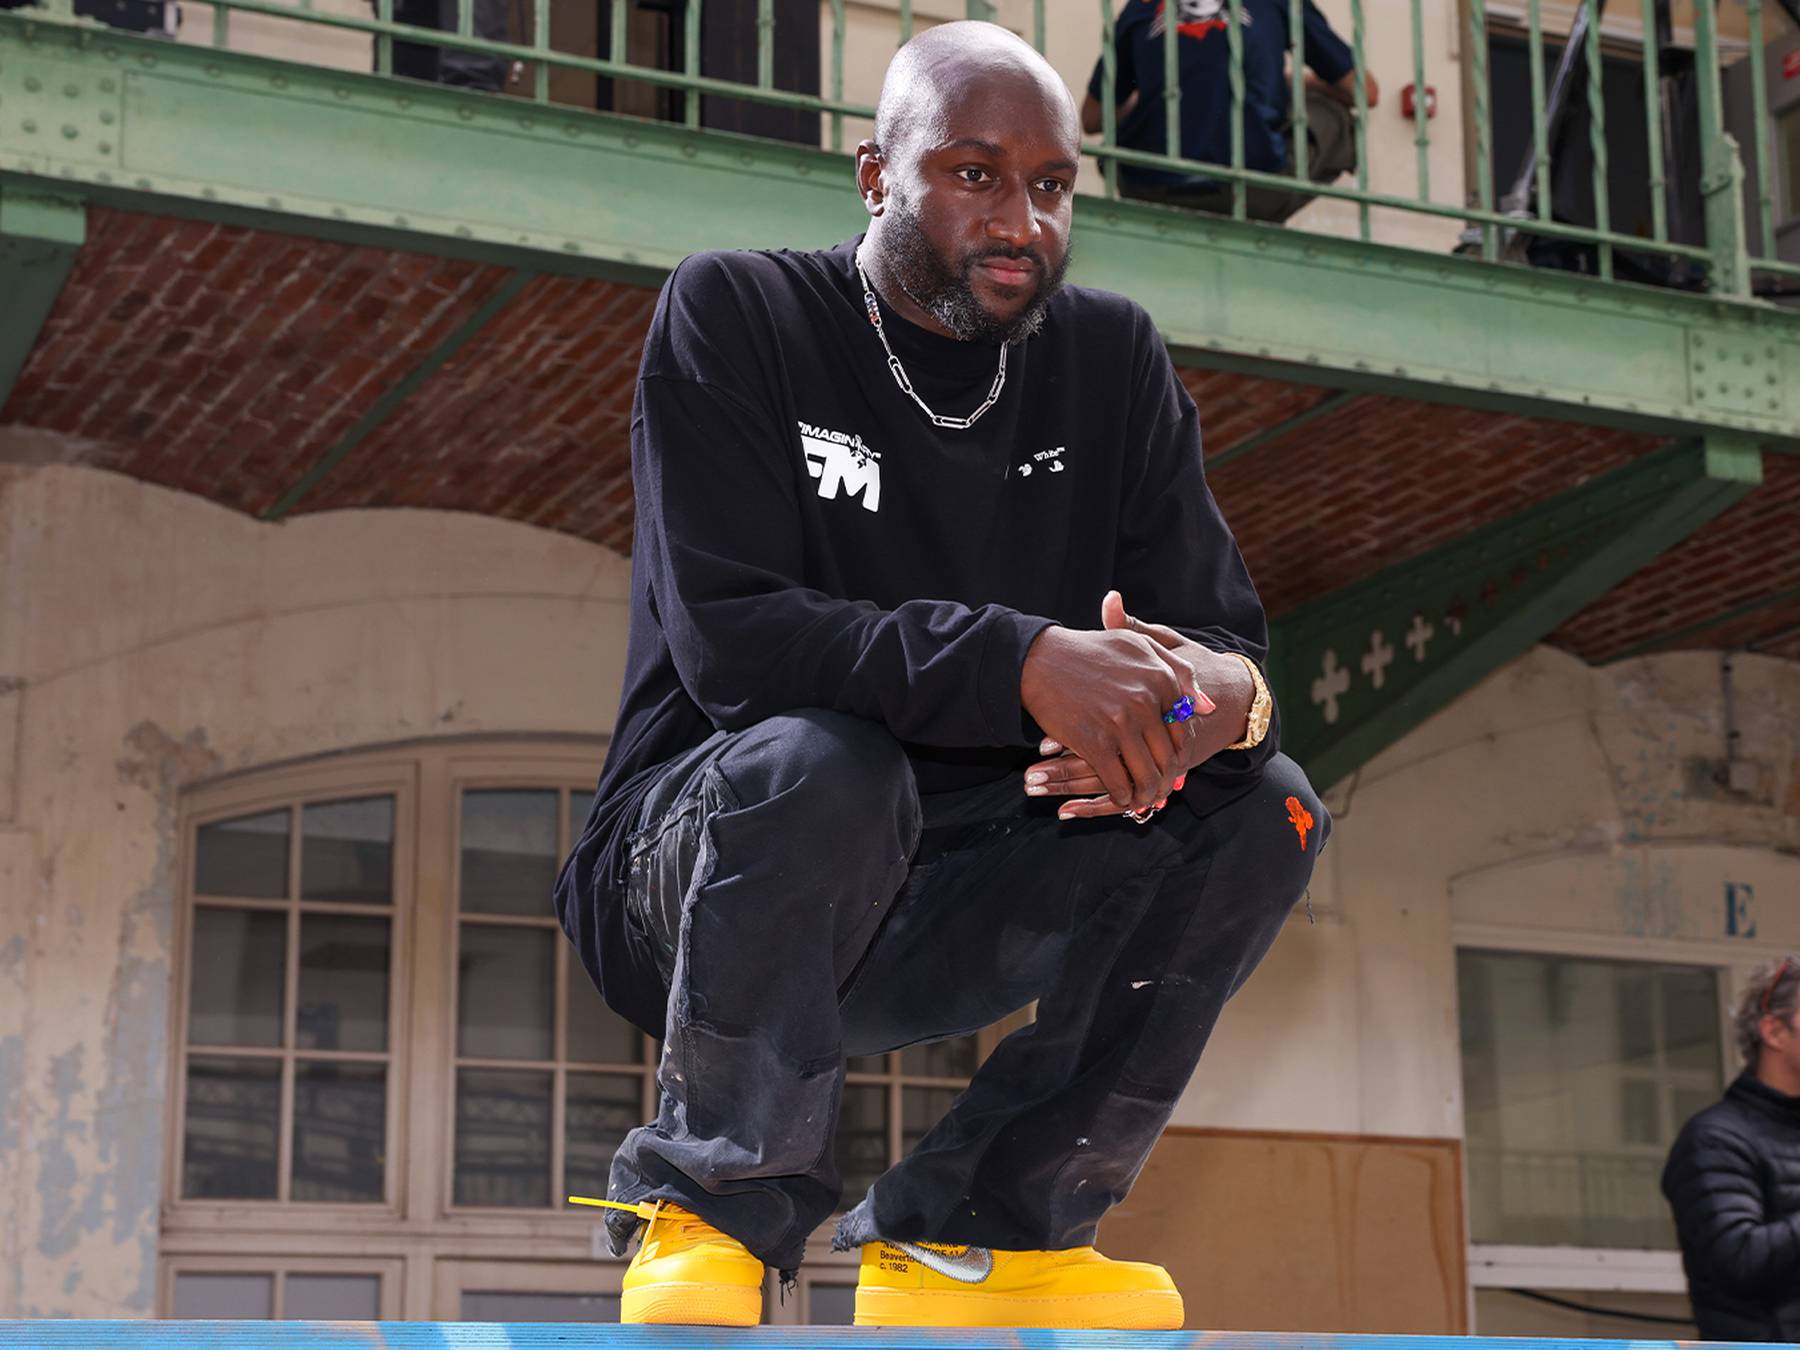 Nike At The Museum: Inside the Private View of Virgil Abloh's